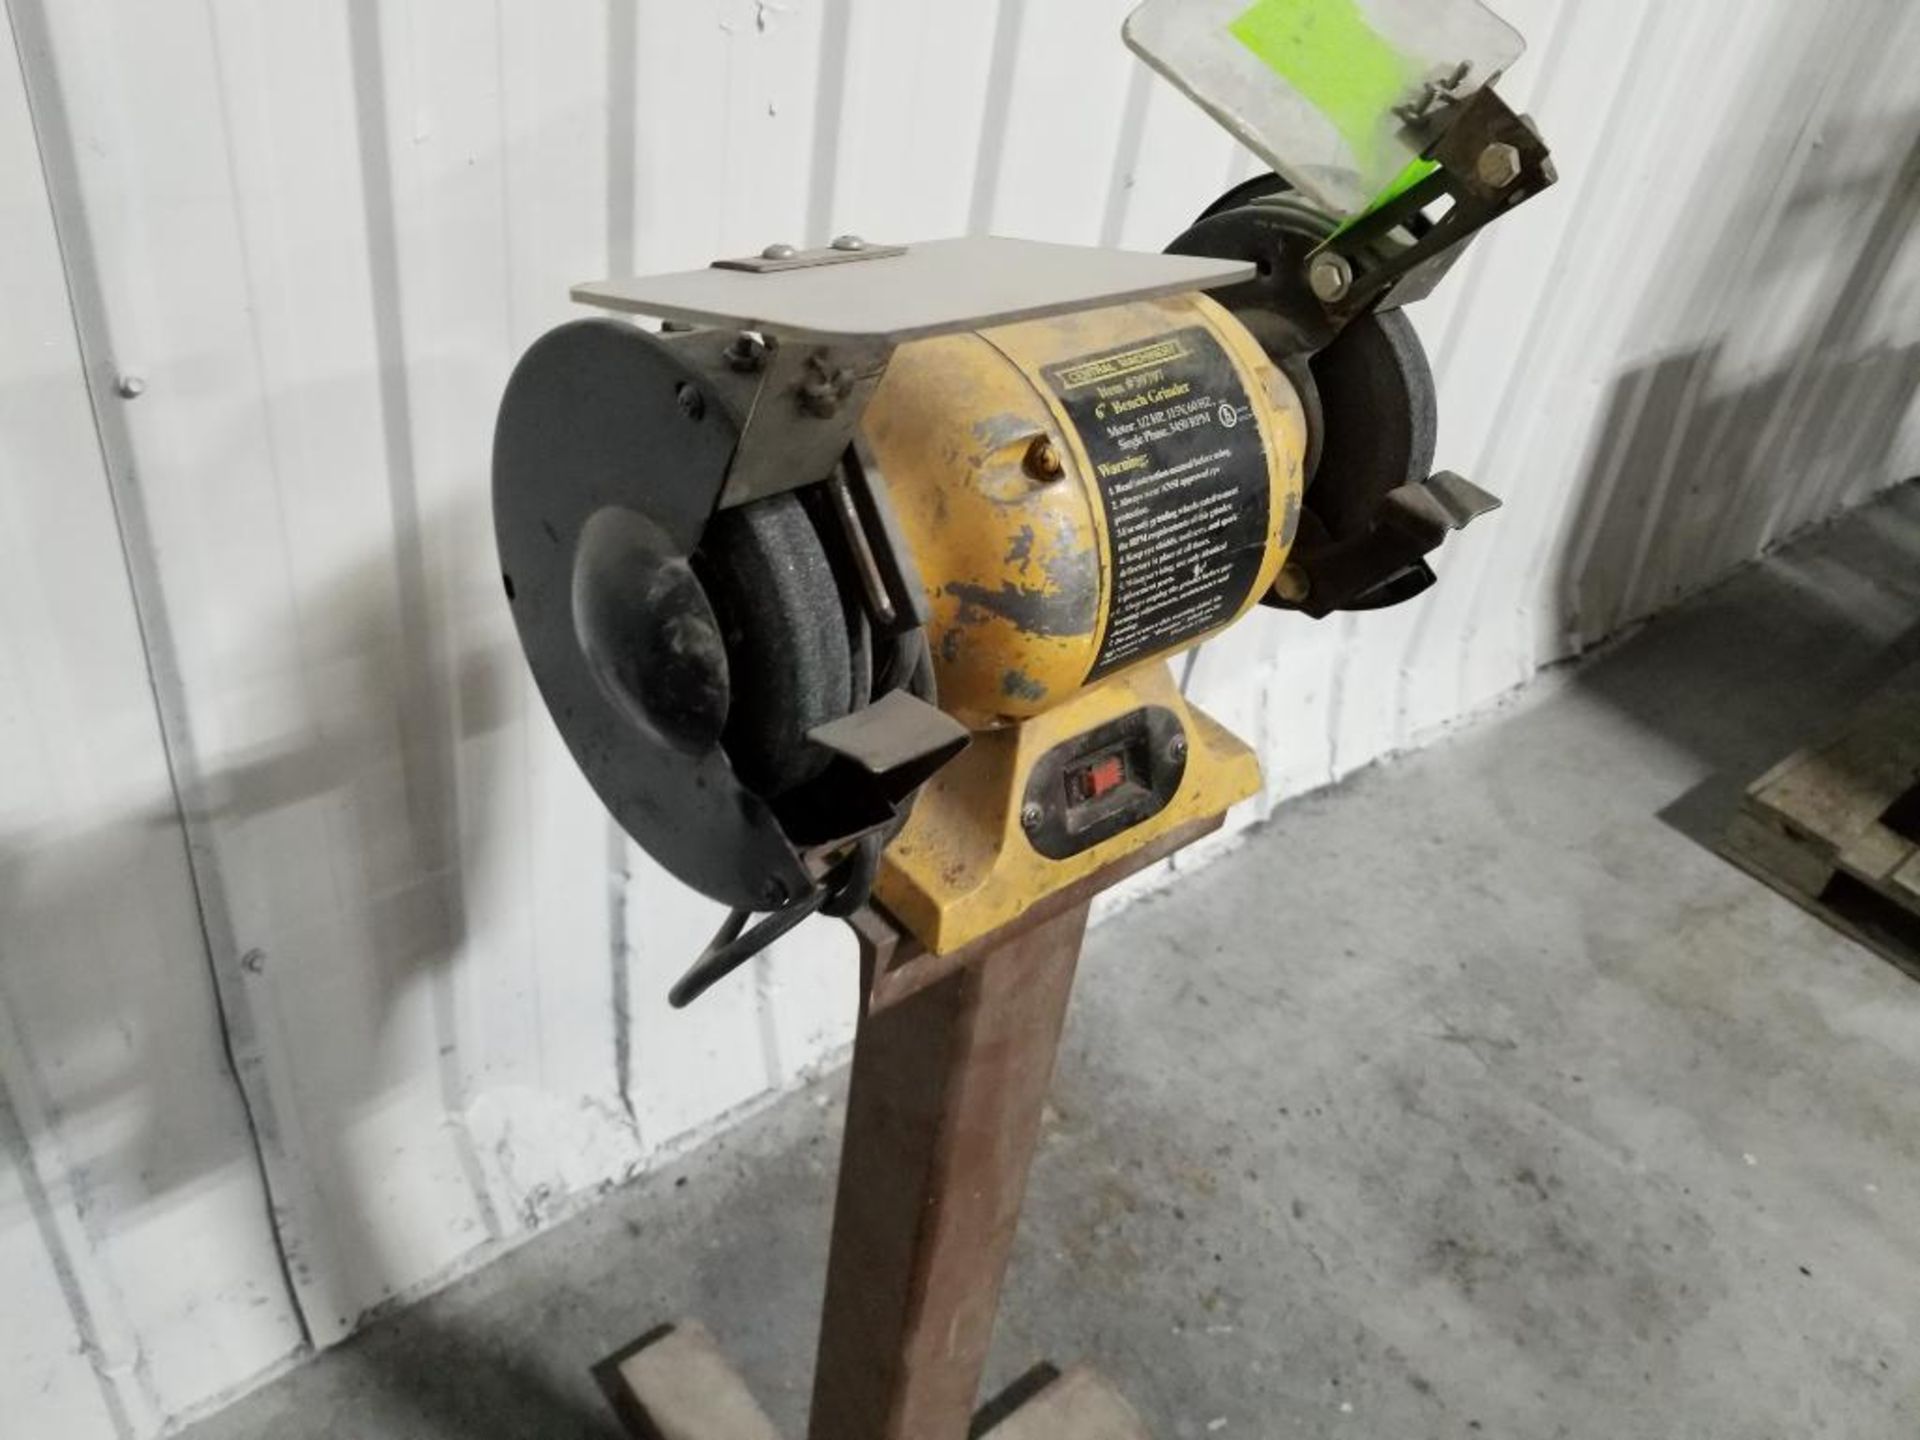 Central Machinery 6in double end bench grinder with stand. 115v single phase. - Image 8 of 9